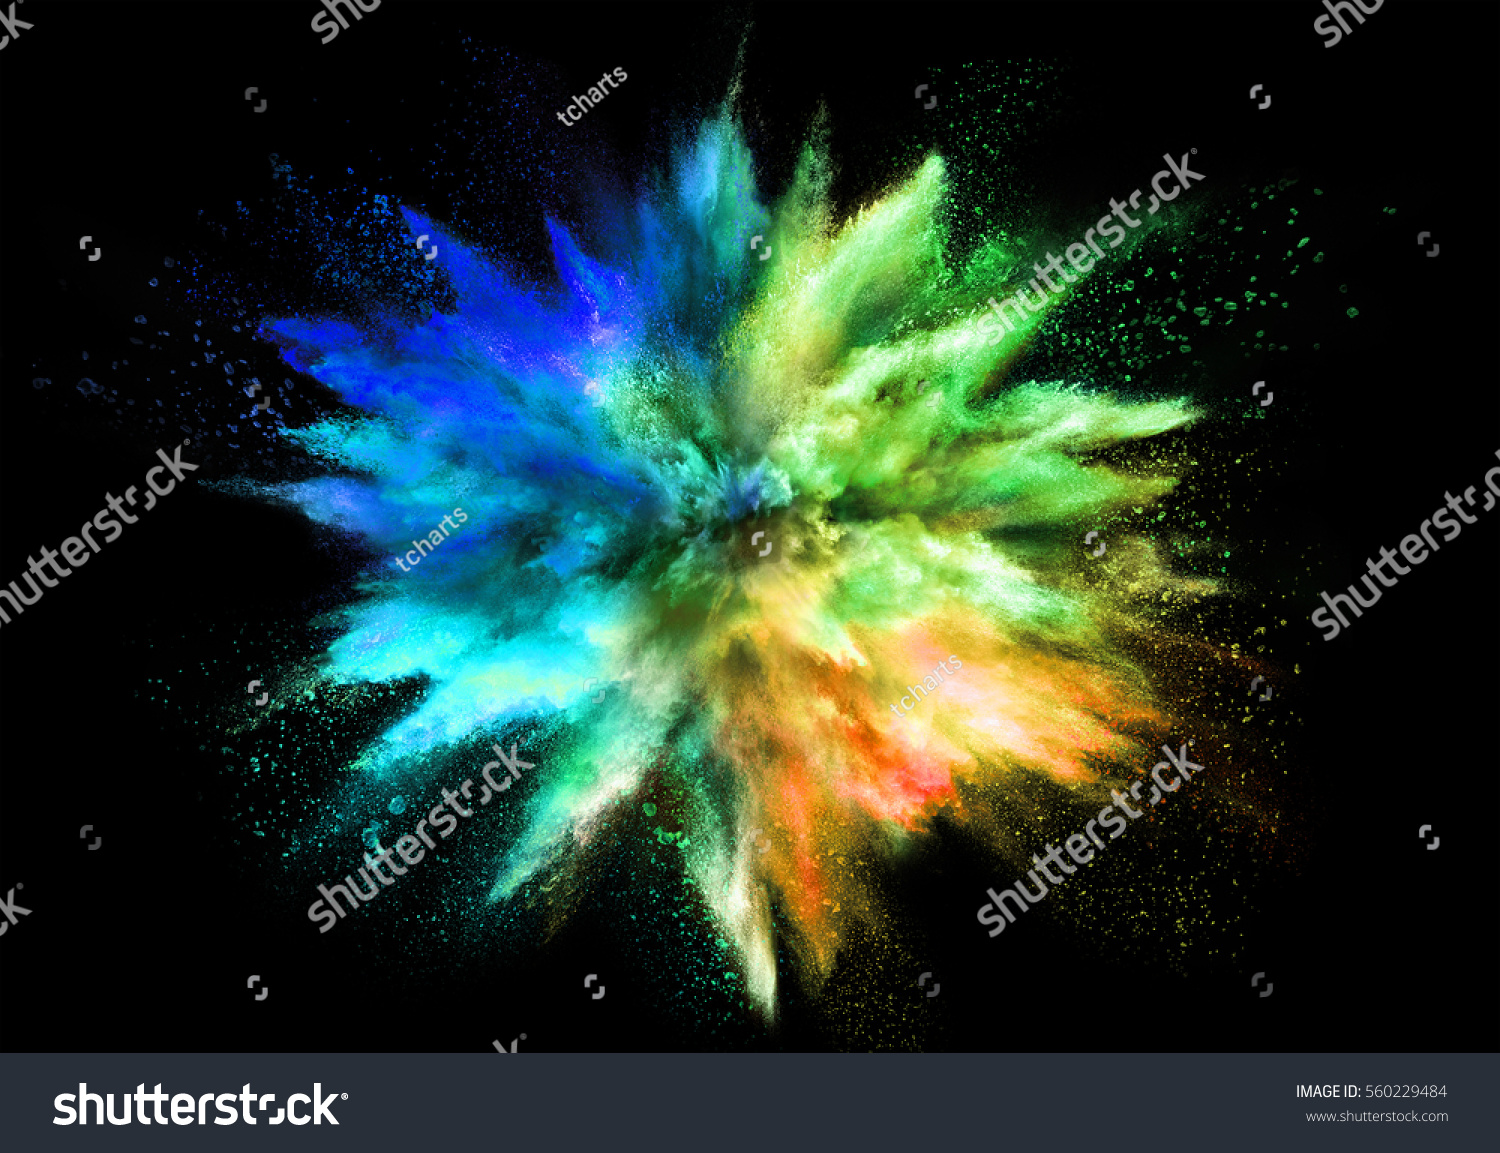 Explosion of colored powder, isolated on black background #560229484